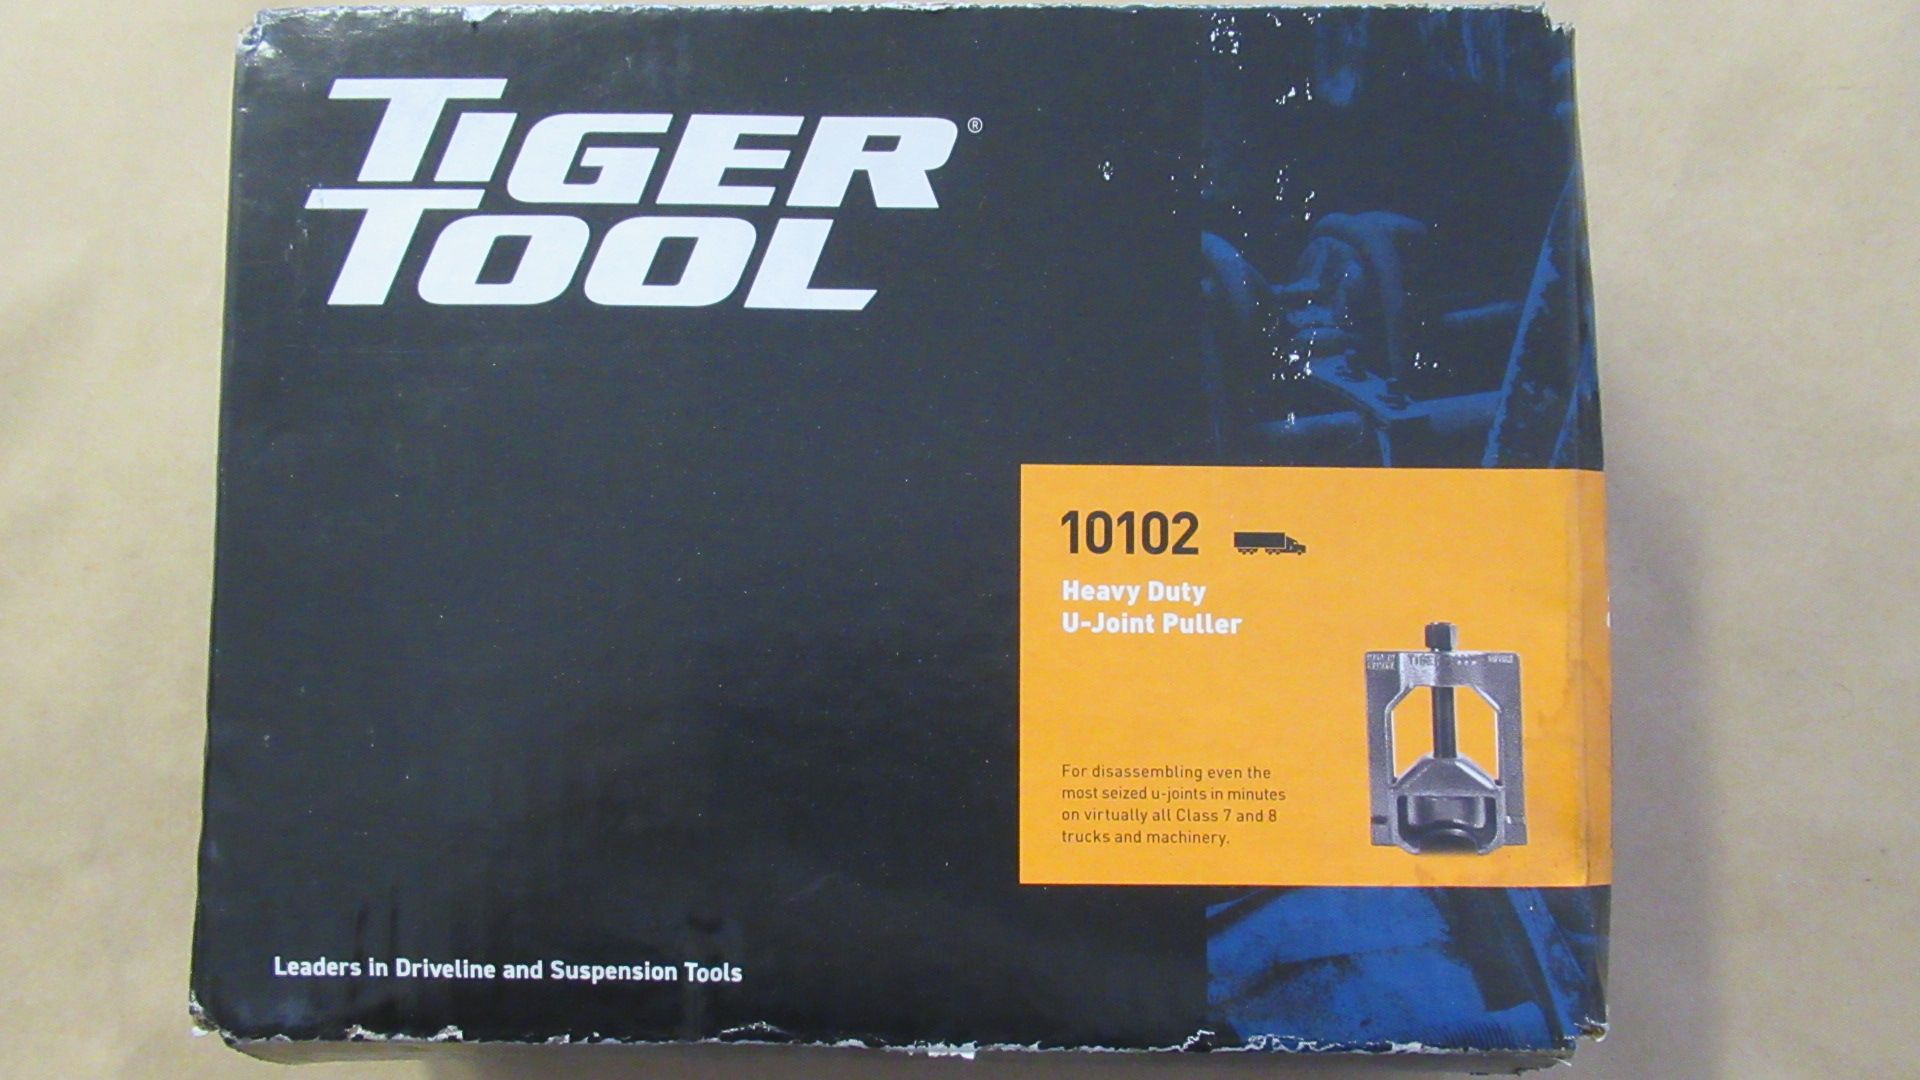 HEAVY DUTY U-JOINT PULLER TIGER TOOLS 10102 - Image 2 of 2